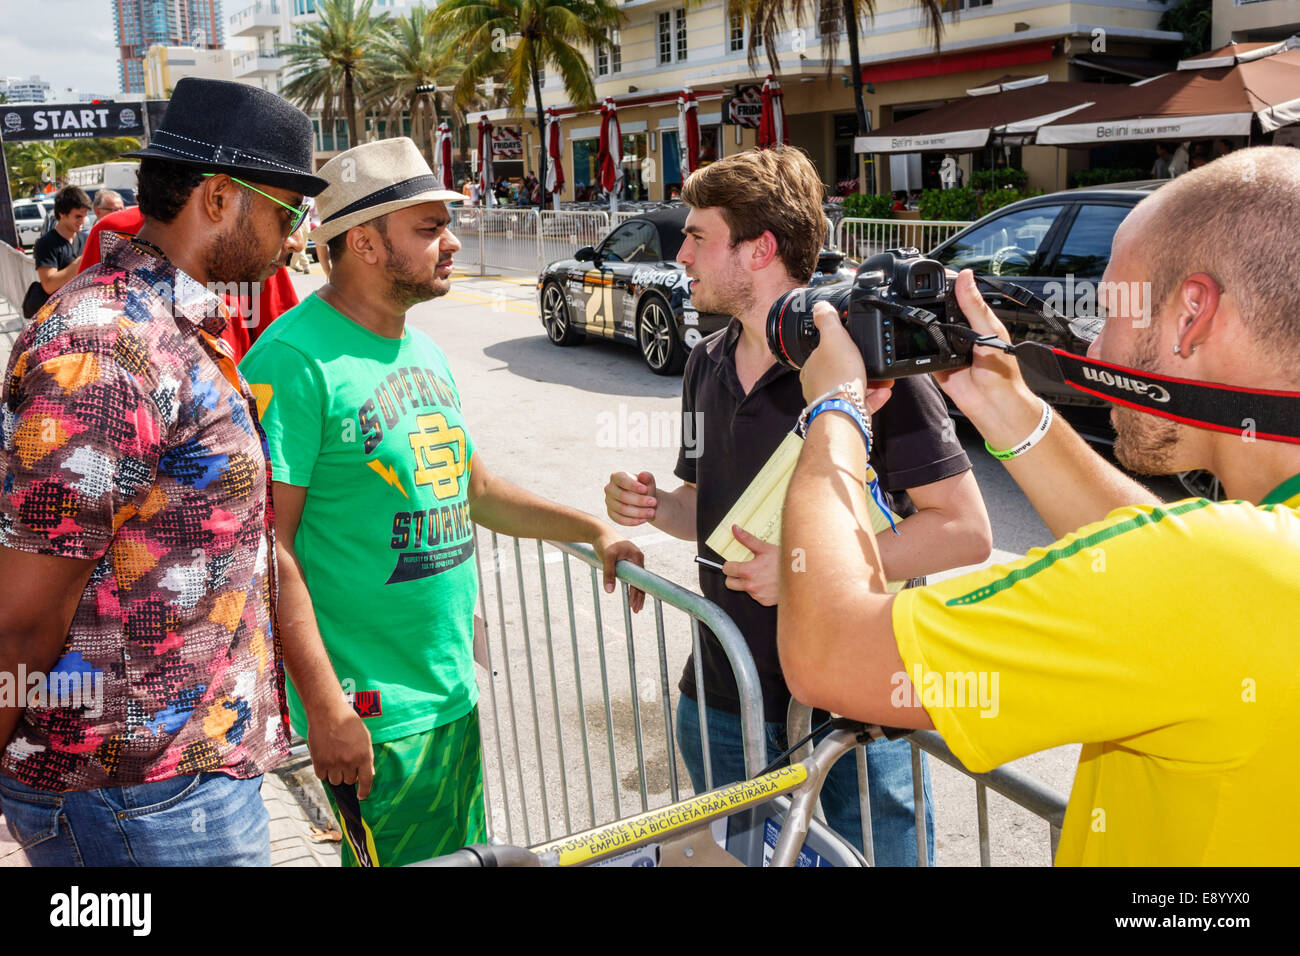 Miami Beach Florida,Ocean Drive,Gumball 3000 road race motor rally,sports cars,racing,exhibit exhibition collection man men male,drivers,interview,jou Stock Photo